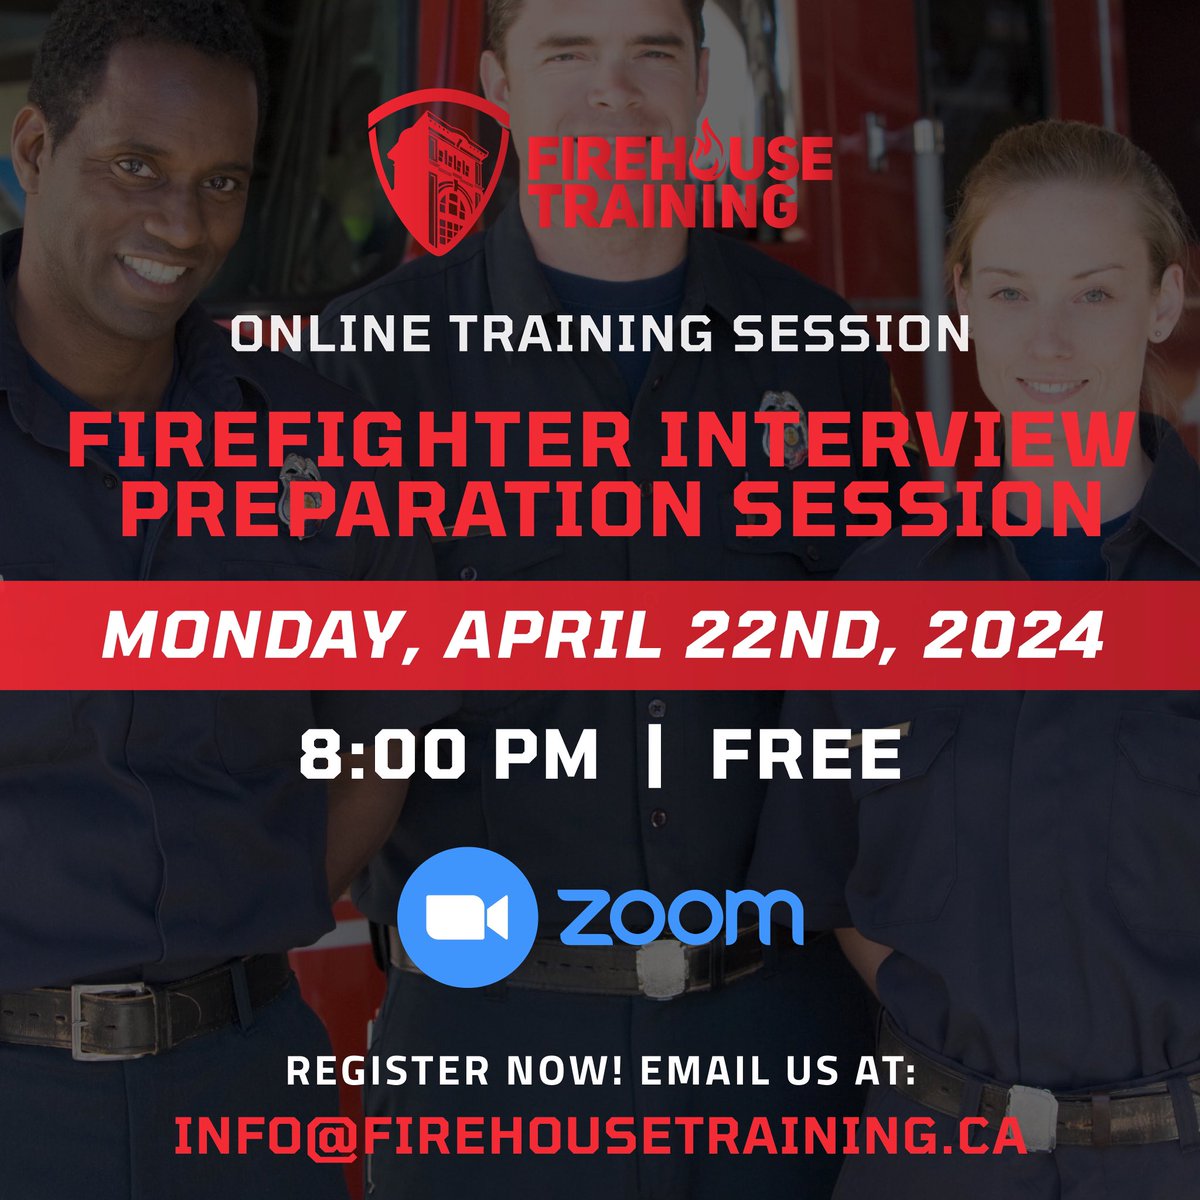 Here we go with another FREE event announcement!🔥Come and join our next interview prep session in April, as we aim to assist in every aspect of the panel interview process. Dm us to register!🧑‍🚒#firehousetraining #interviewprepsession #careercoach